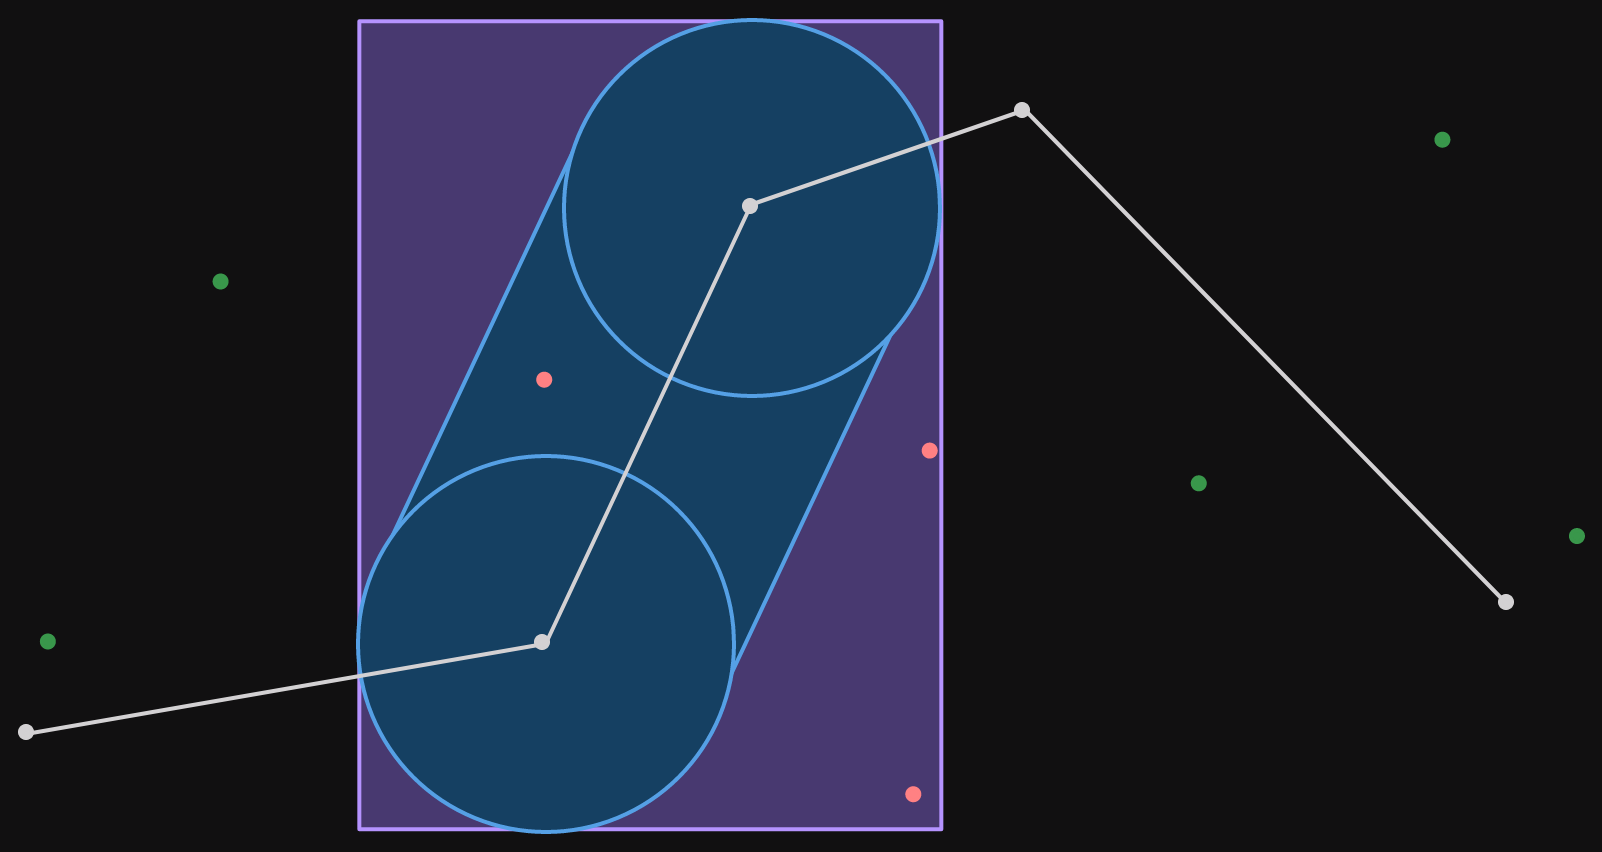 The polyline for our corridor is shown, but the blue regions representing the radius are only shown for the second segment from the left. A purple bounding box is shown around the segment corridor. The points to filter are shown, now there are 3 points that fall within the segment bounding box.